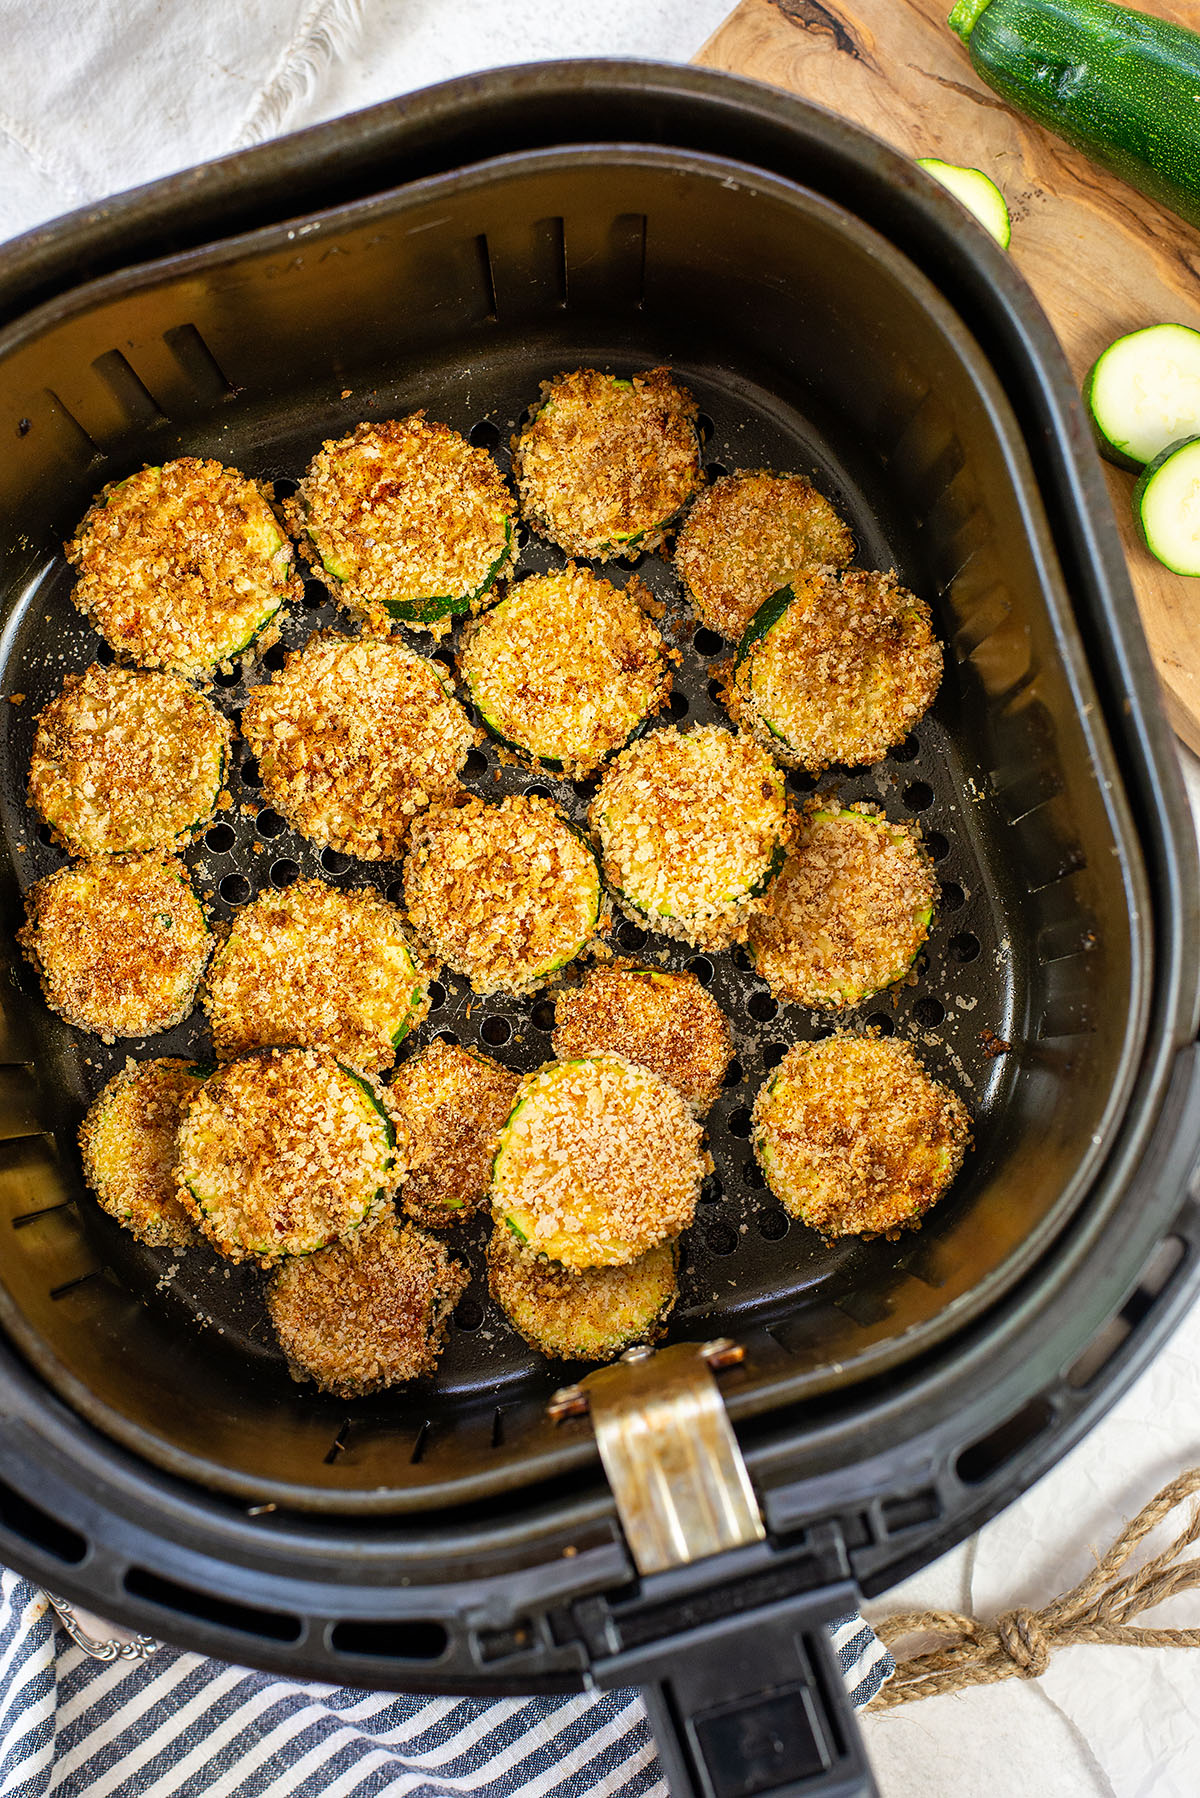 Cooked air fried zucchini in an air fryer basket.